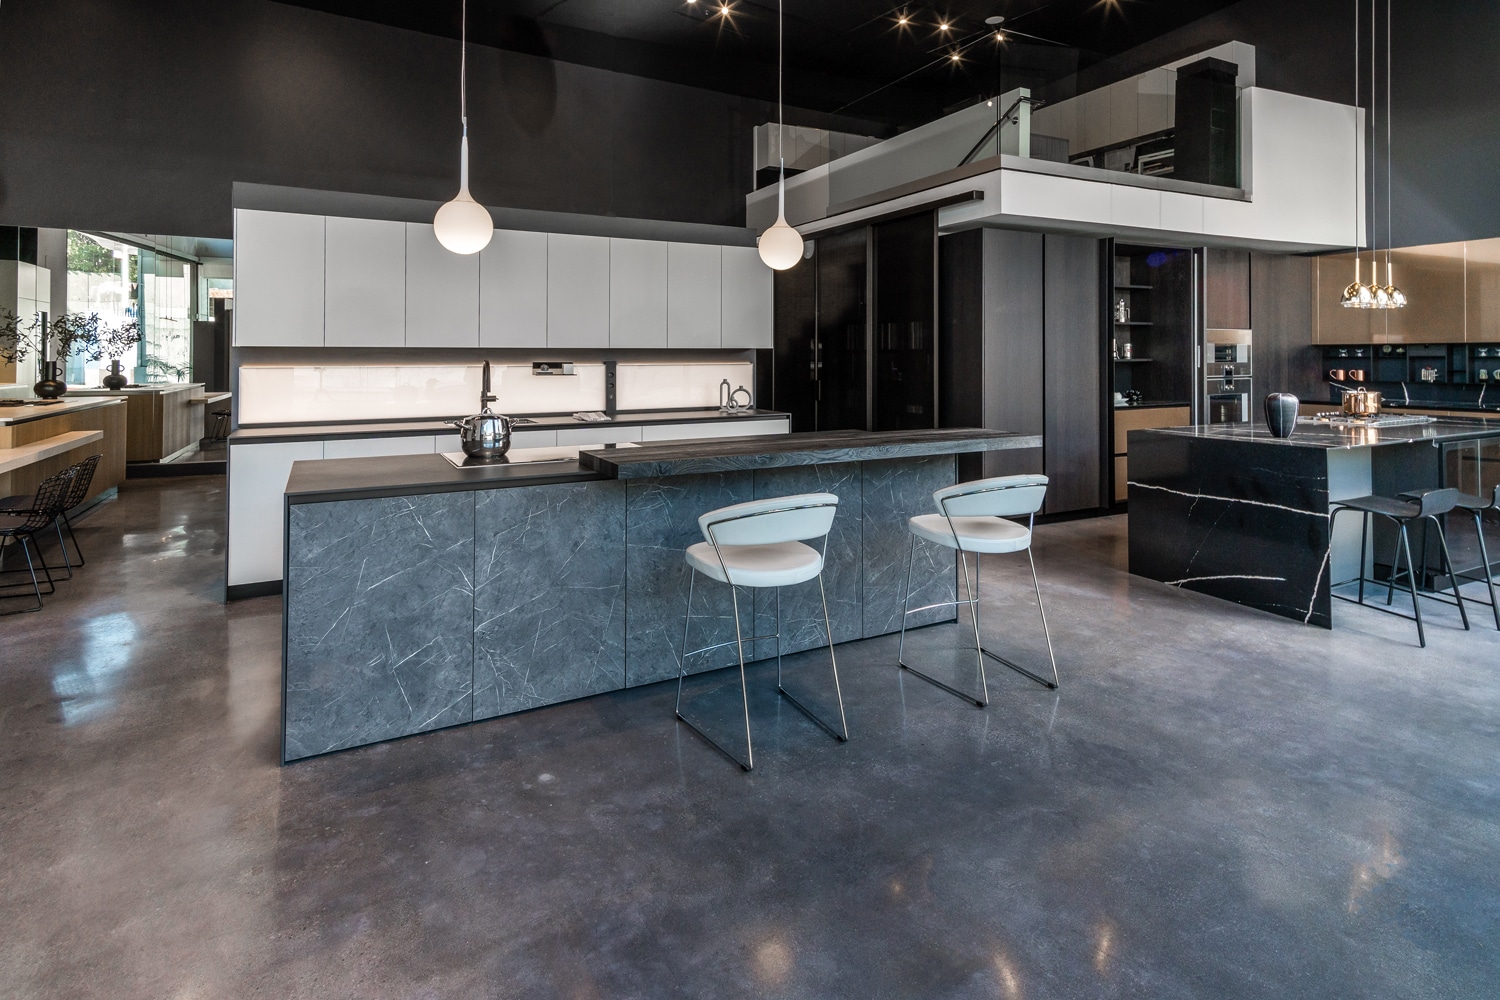 Modern kitchen designs and finishes from our collection, on display at MandiCasa Los Angeles.